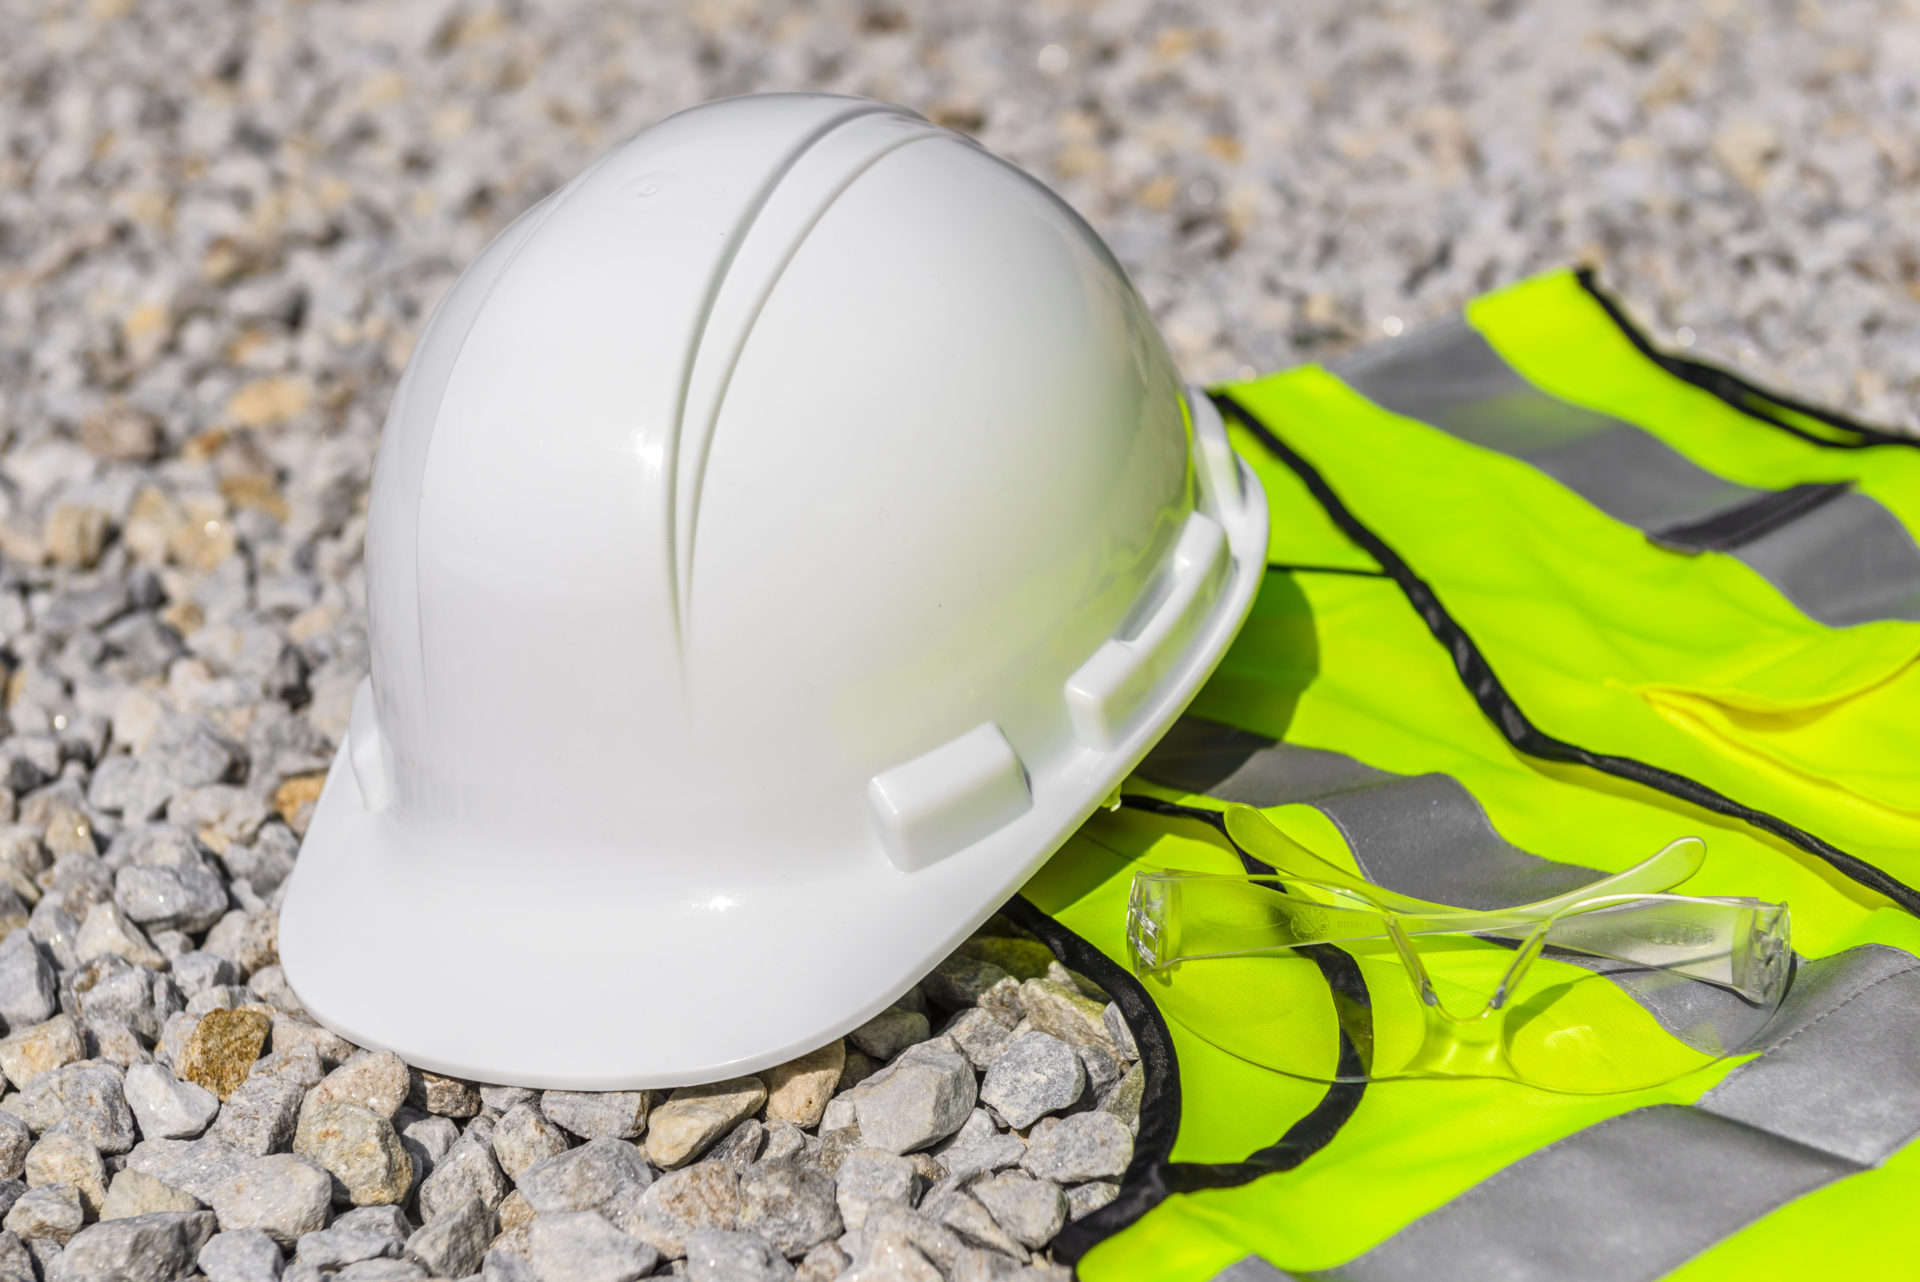 A Positive Settlement following a Workplace Accident